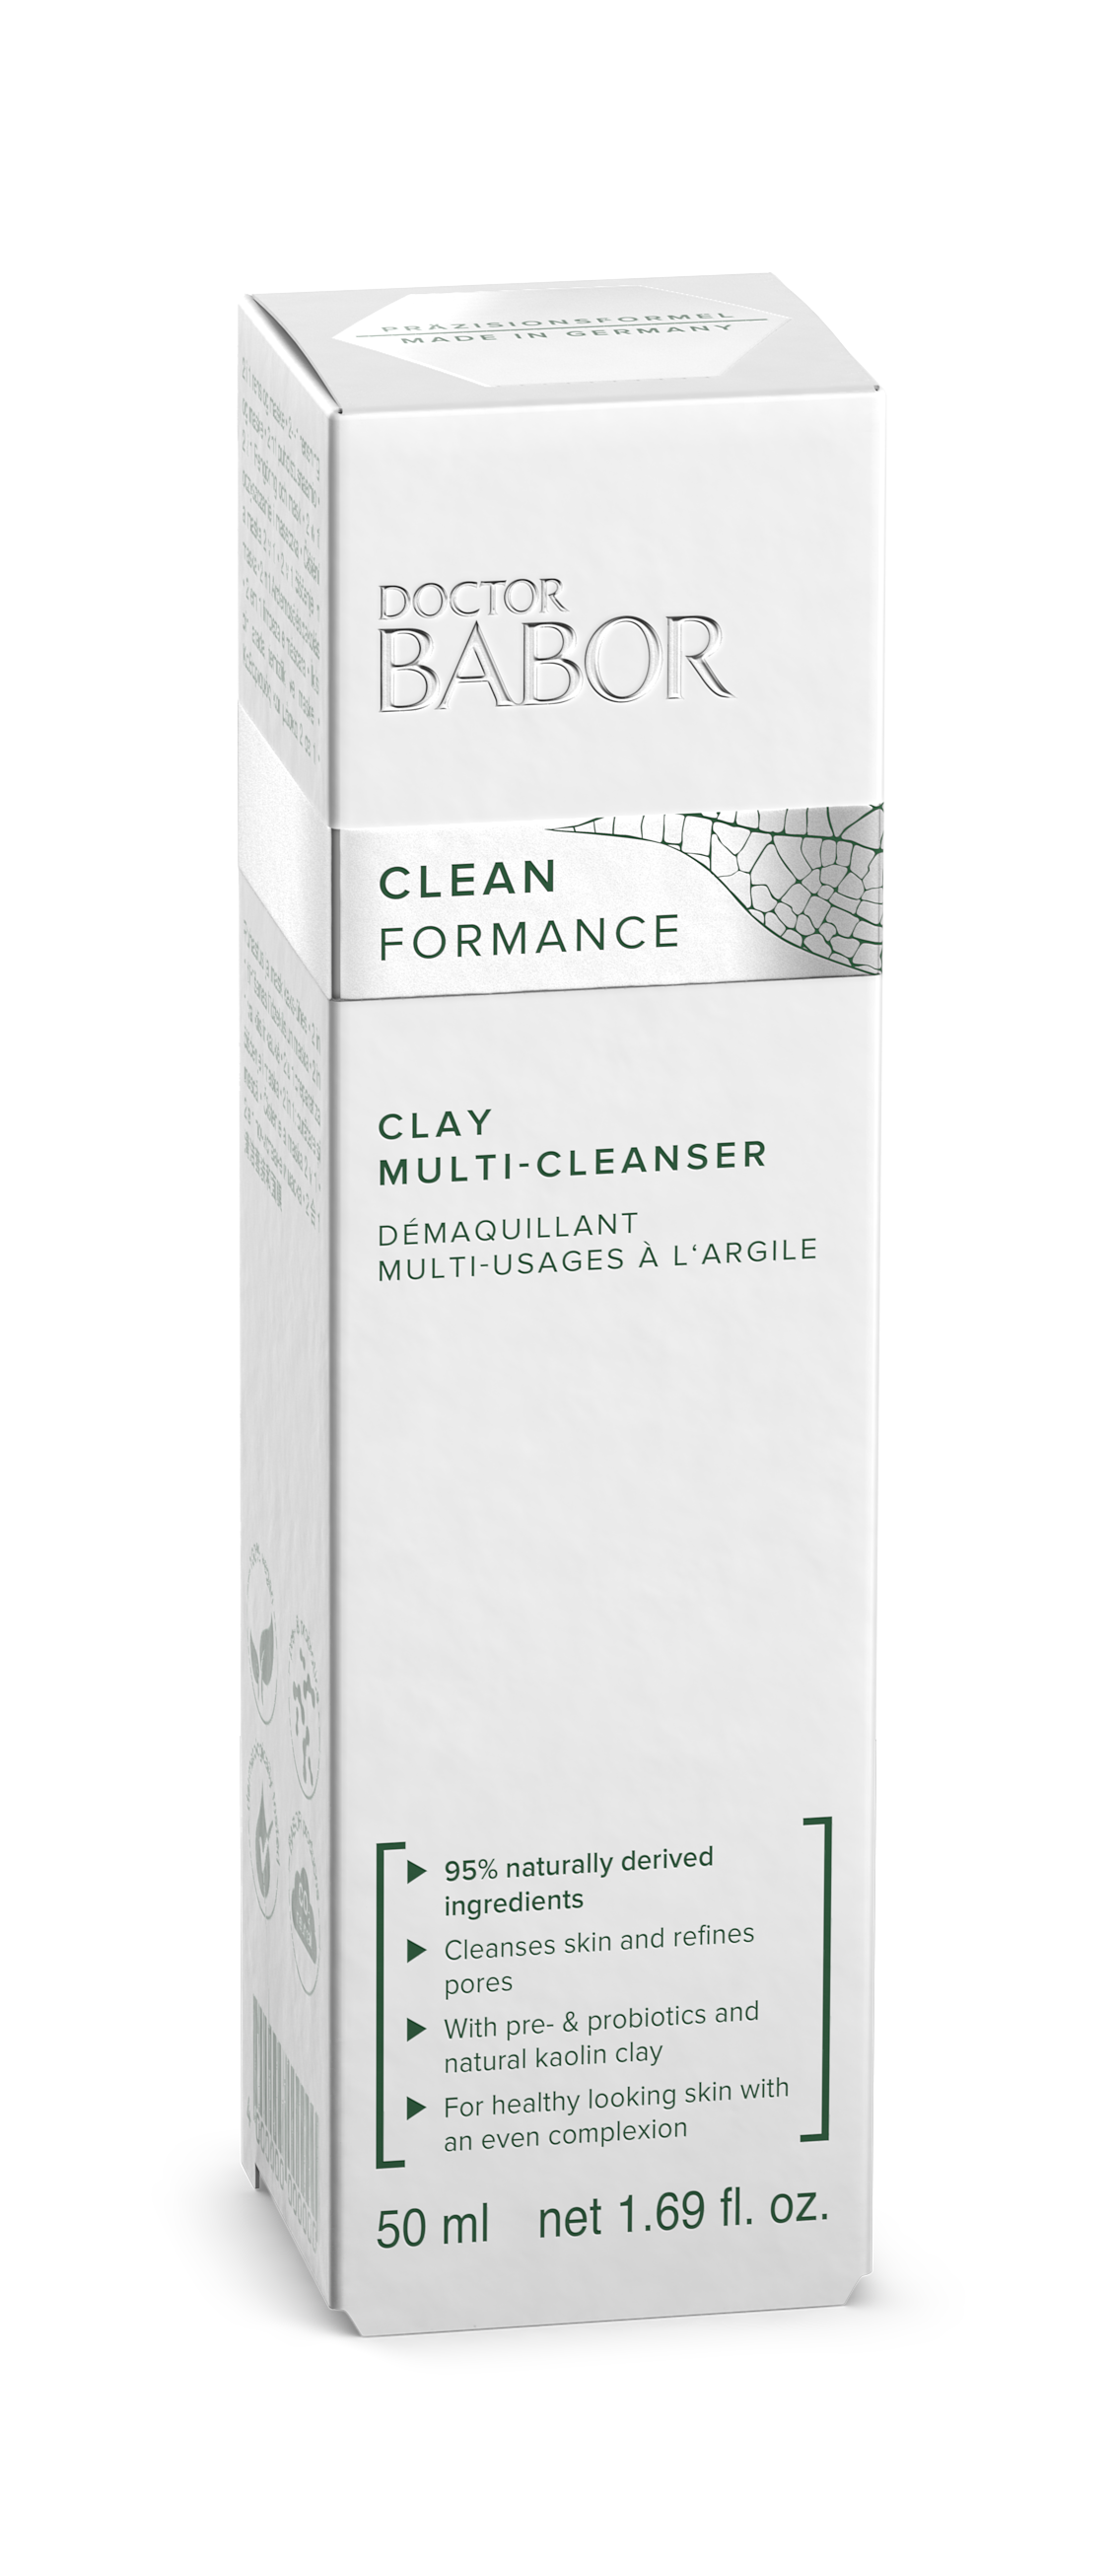 A 2-in-1 multi-functional product. Daily cleanser: Removes make-up, impurities, and refines pores without drying out the skin.